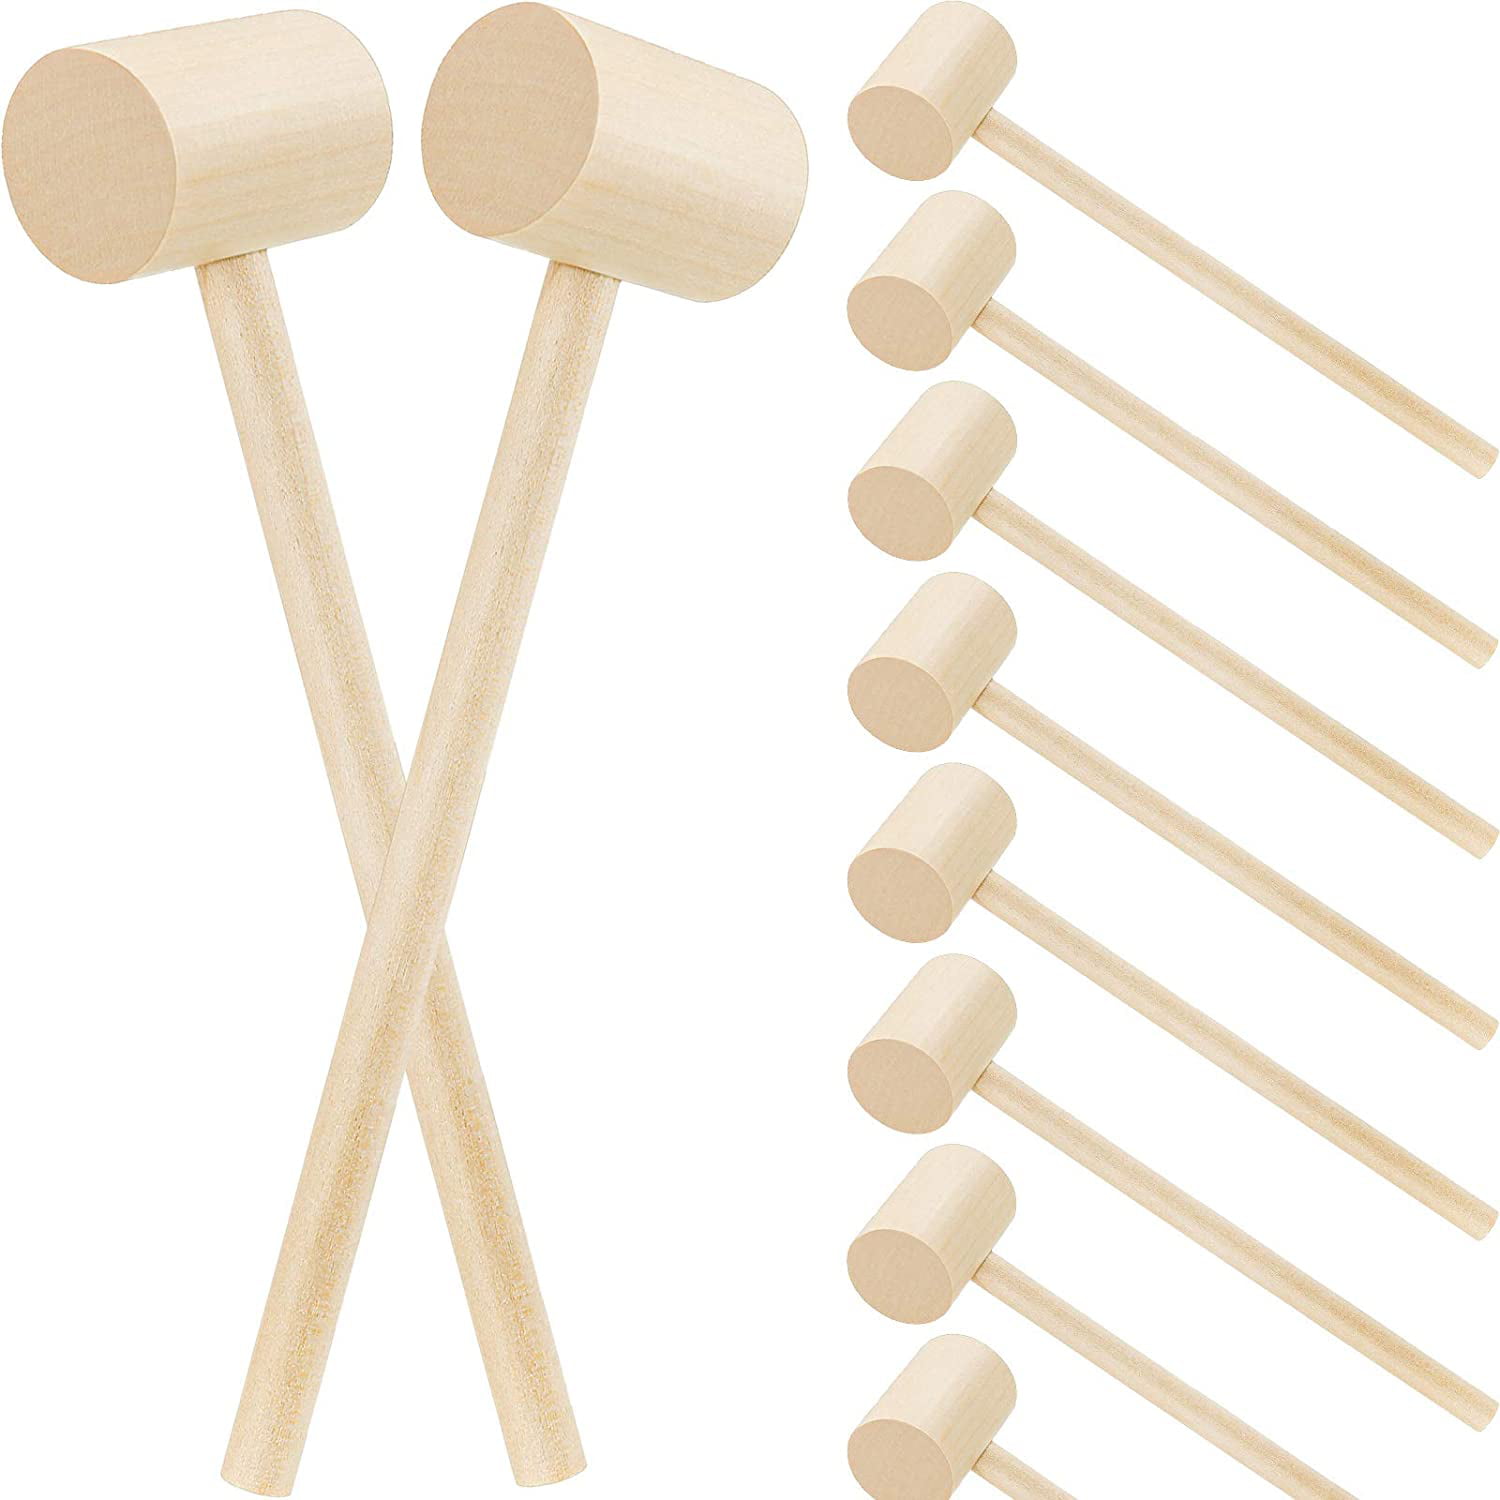 20pcs Wooden Mini Hammers Crab Mallets Toy for Kids Seafood Cracker Hammer Gavel 